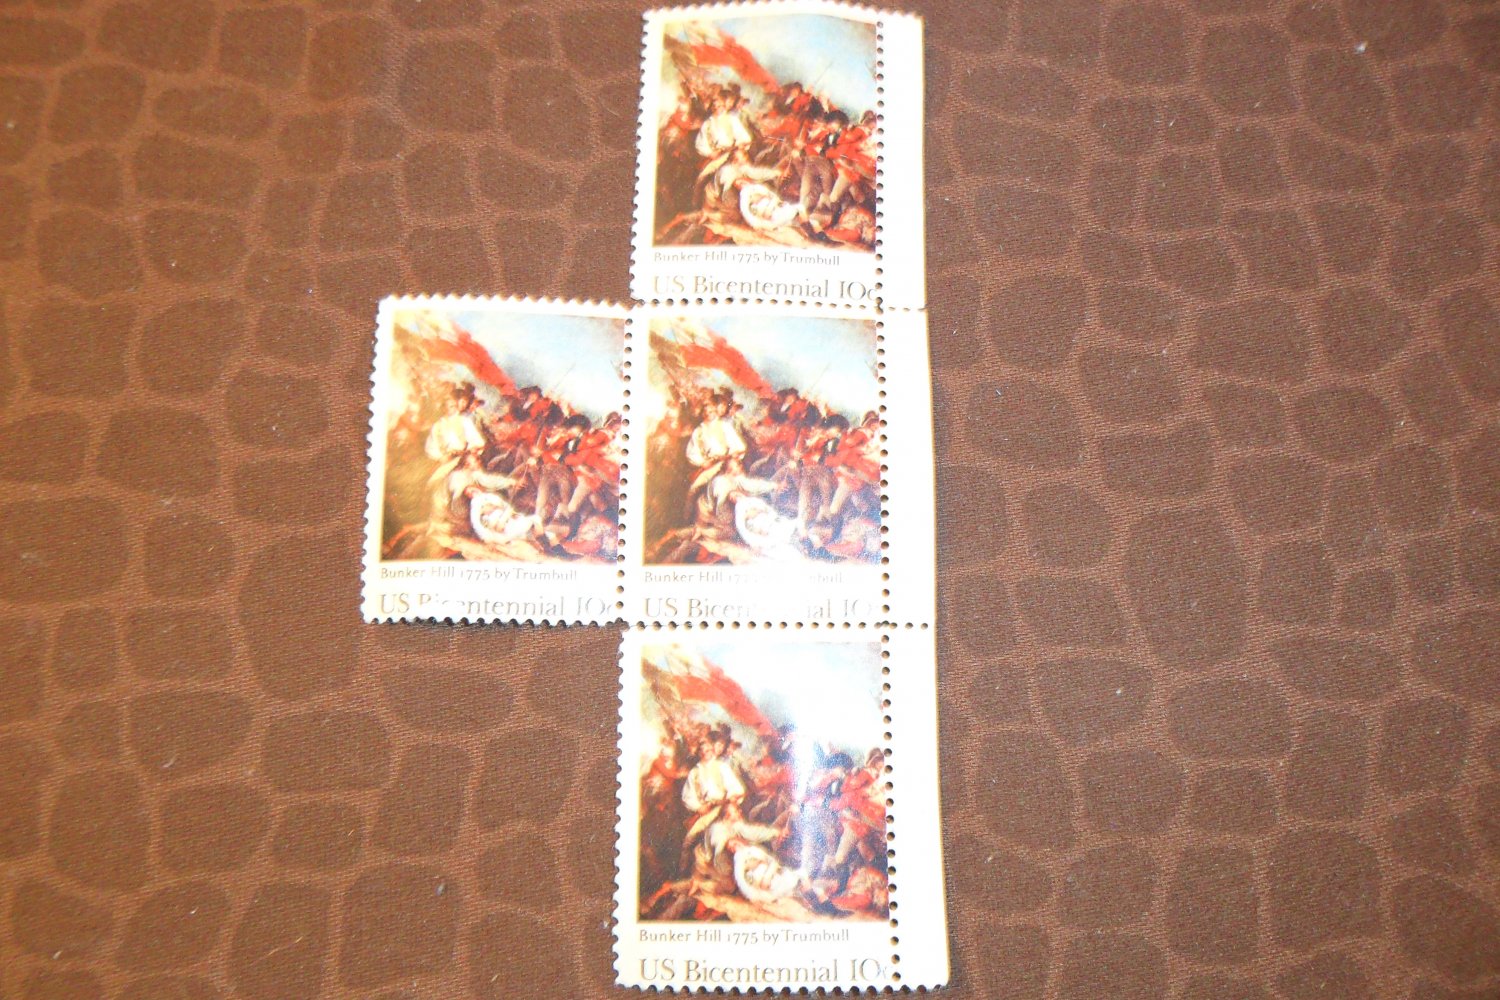 Set of 4 10 CENT US BICENTENNIAL BUNKER HILL 1775 BY TRUMBULL POSTAGE